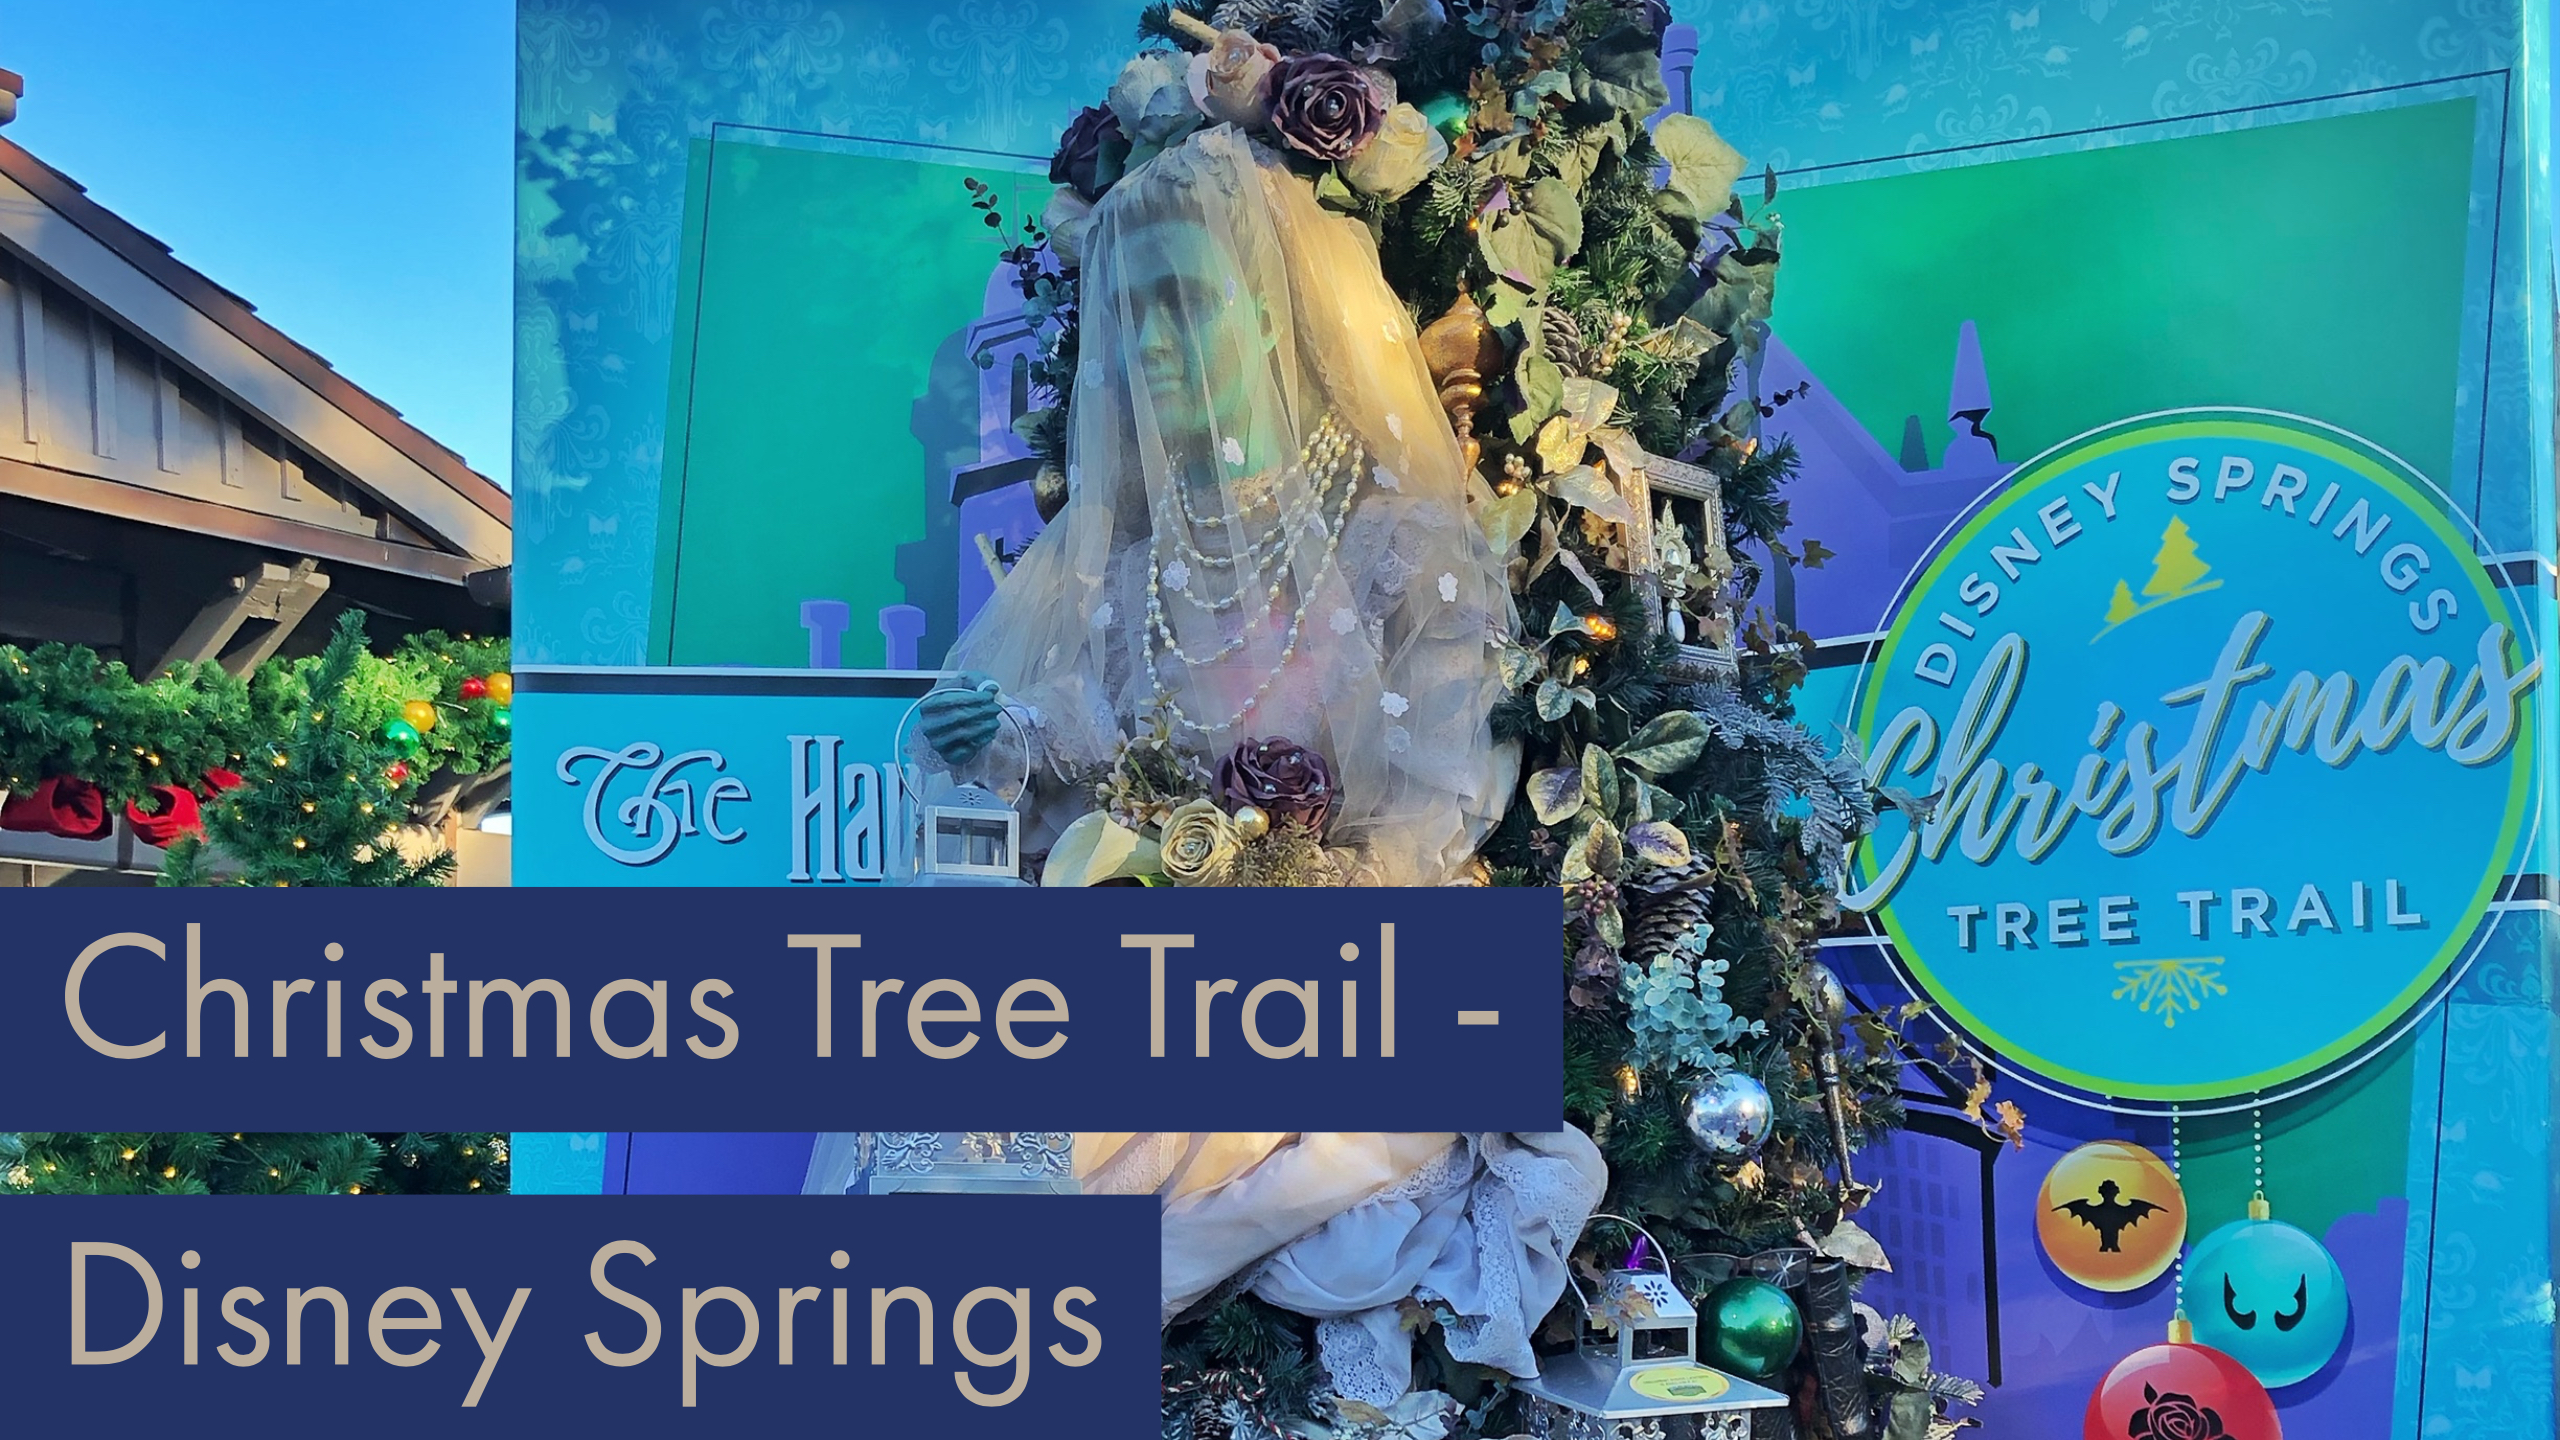 The Christmas Tree Trail at Disney Springs Offers a Magical Seasonal Stroll at the Walt Disney World Resort